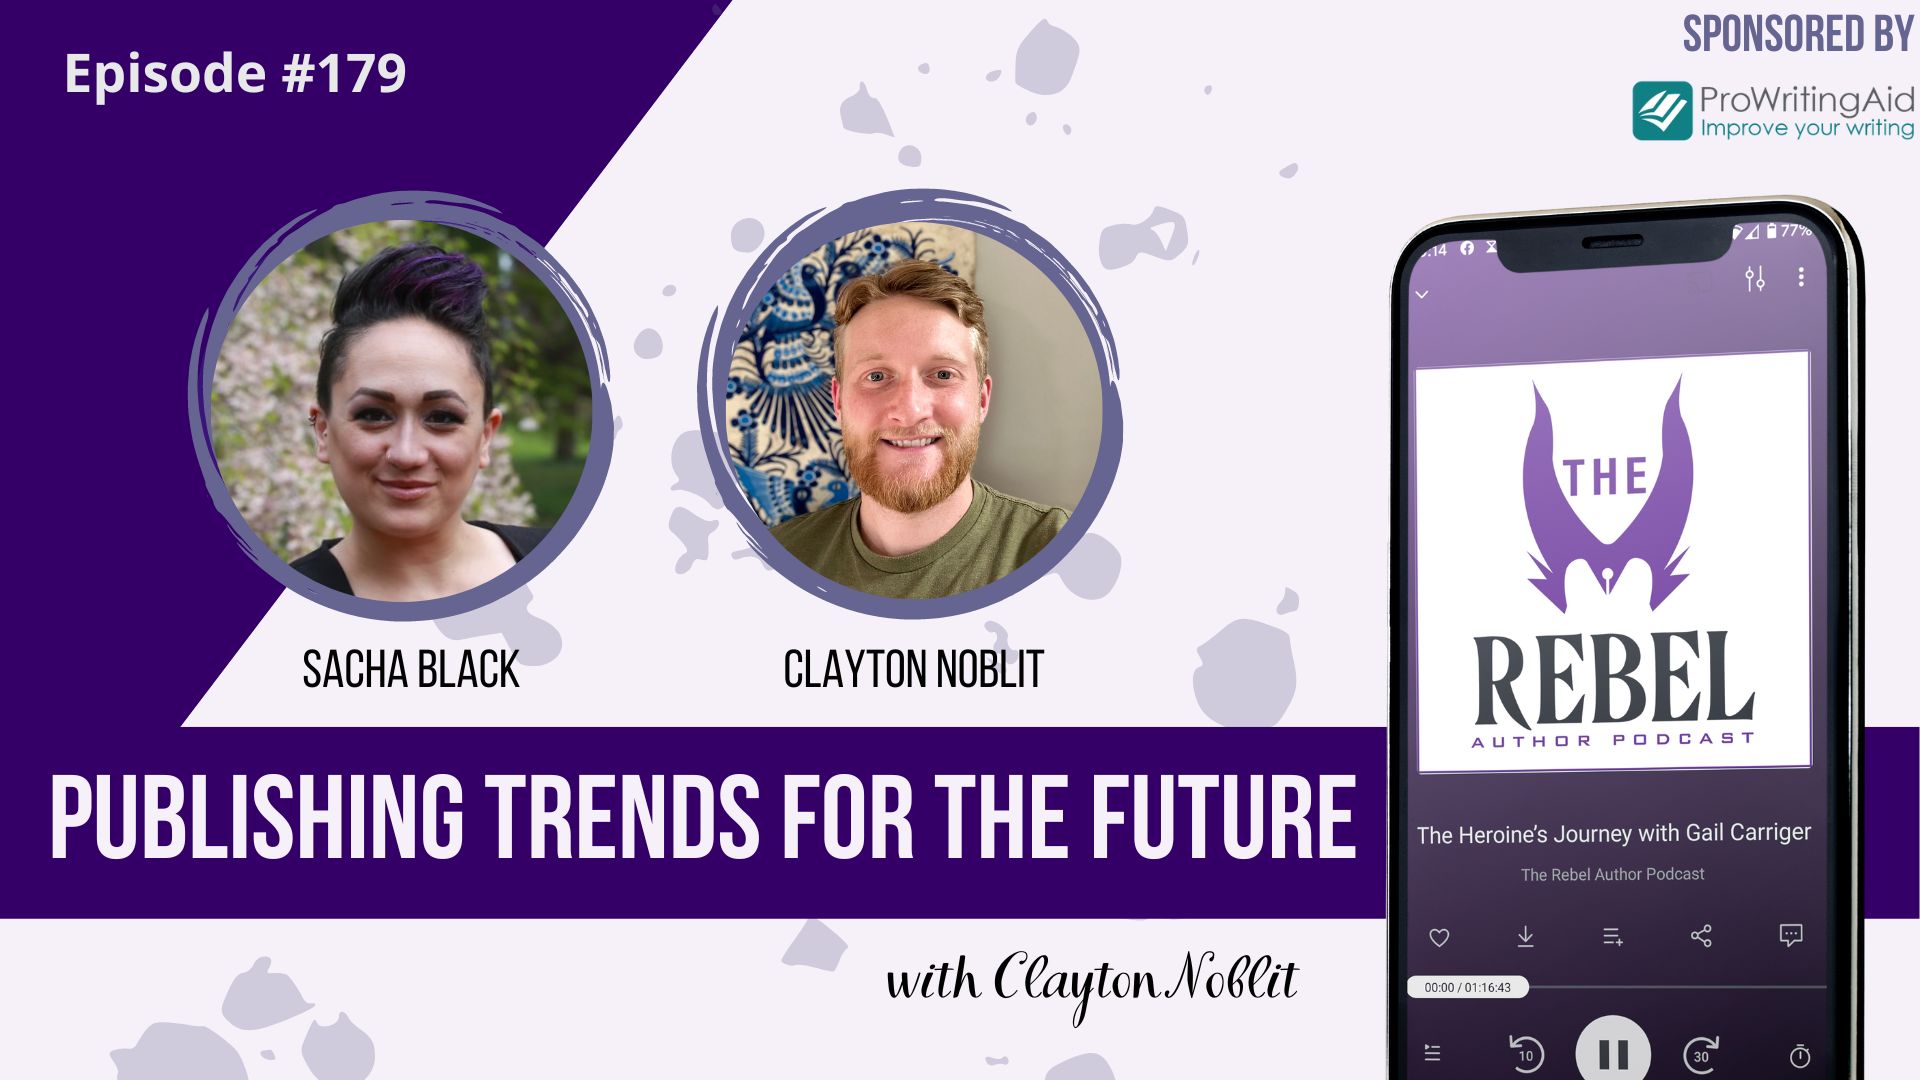 Written Word Media's Clayton Noblit talks Publishing Trends on The Rebel Author Podcast